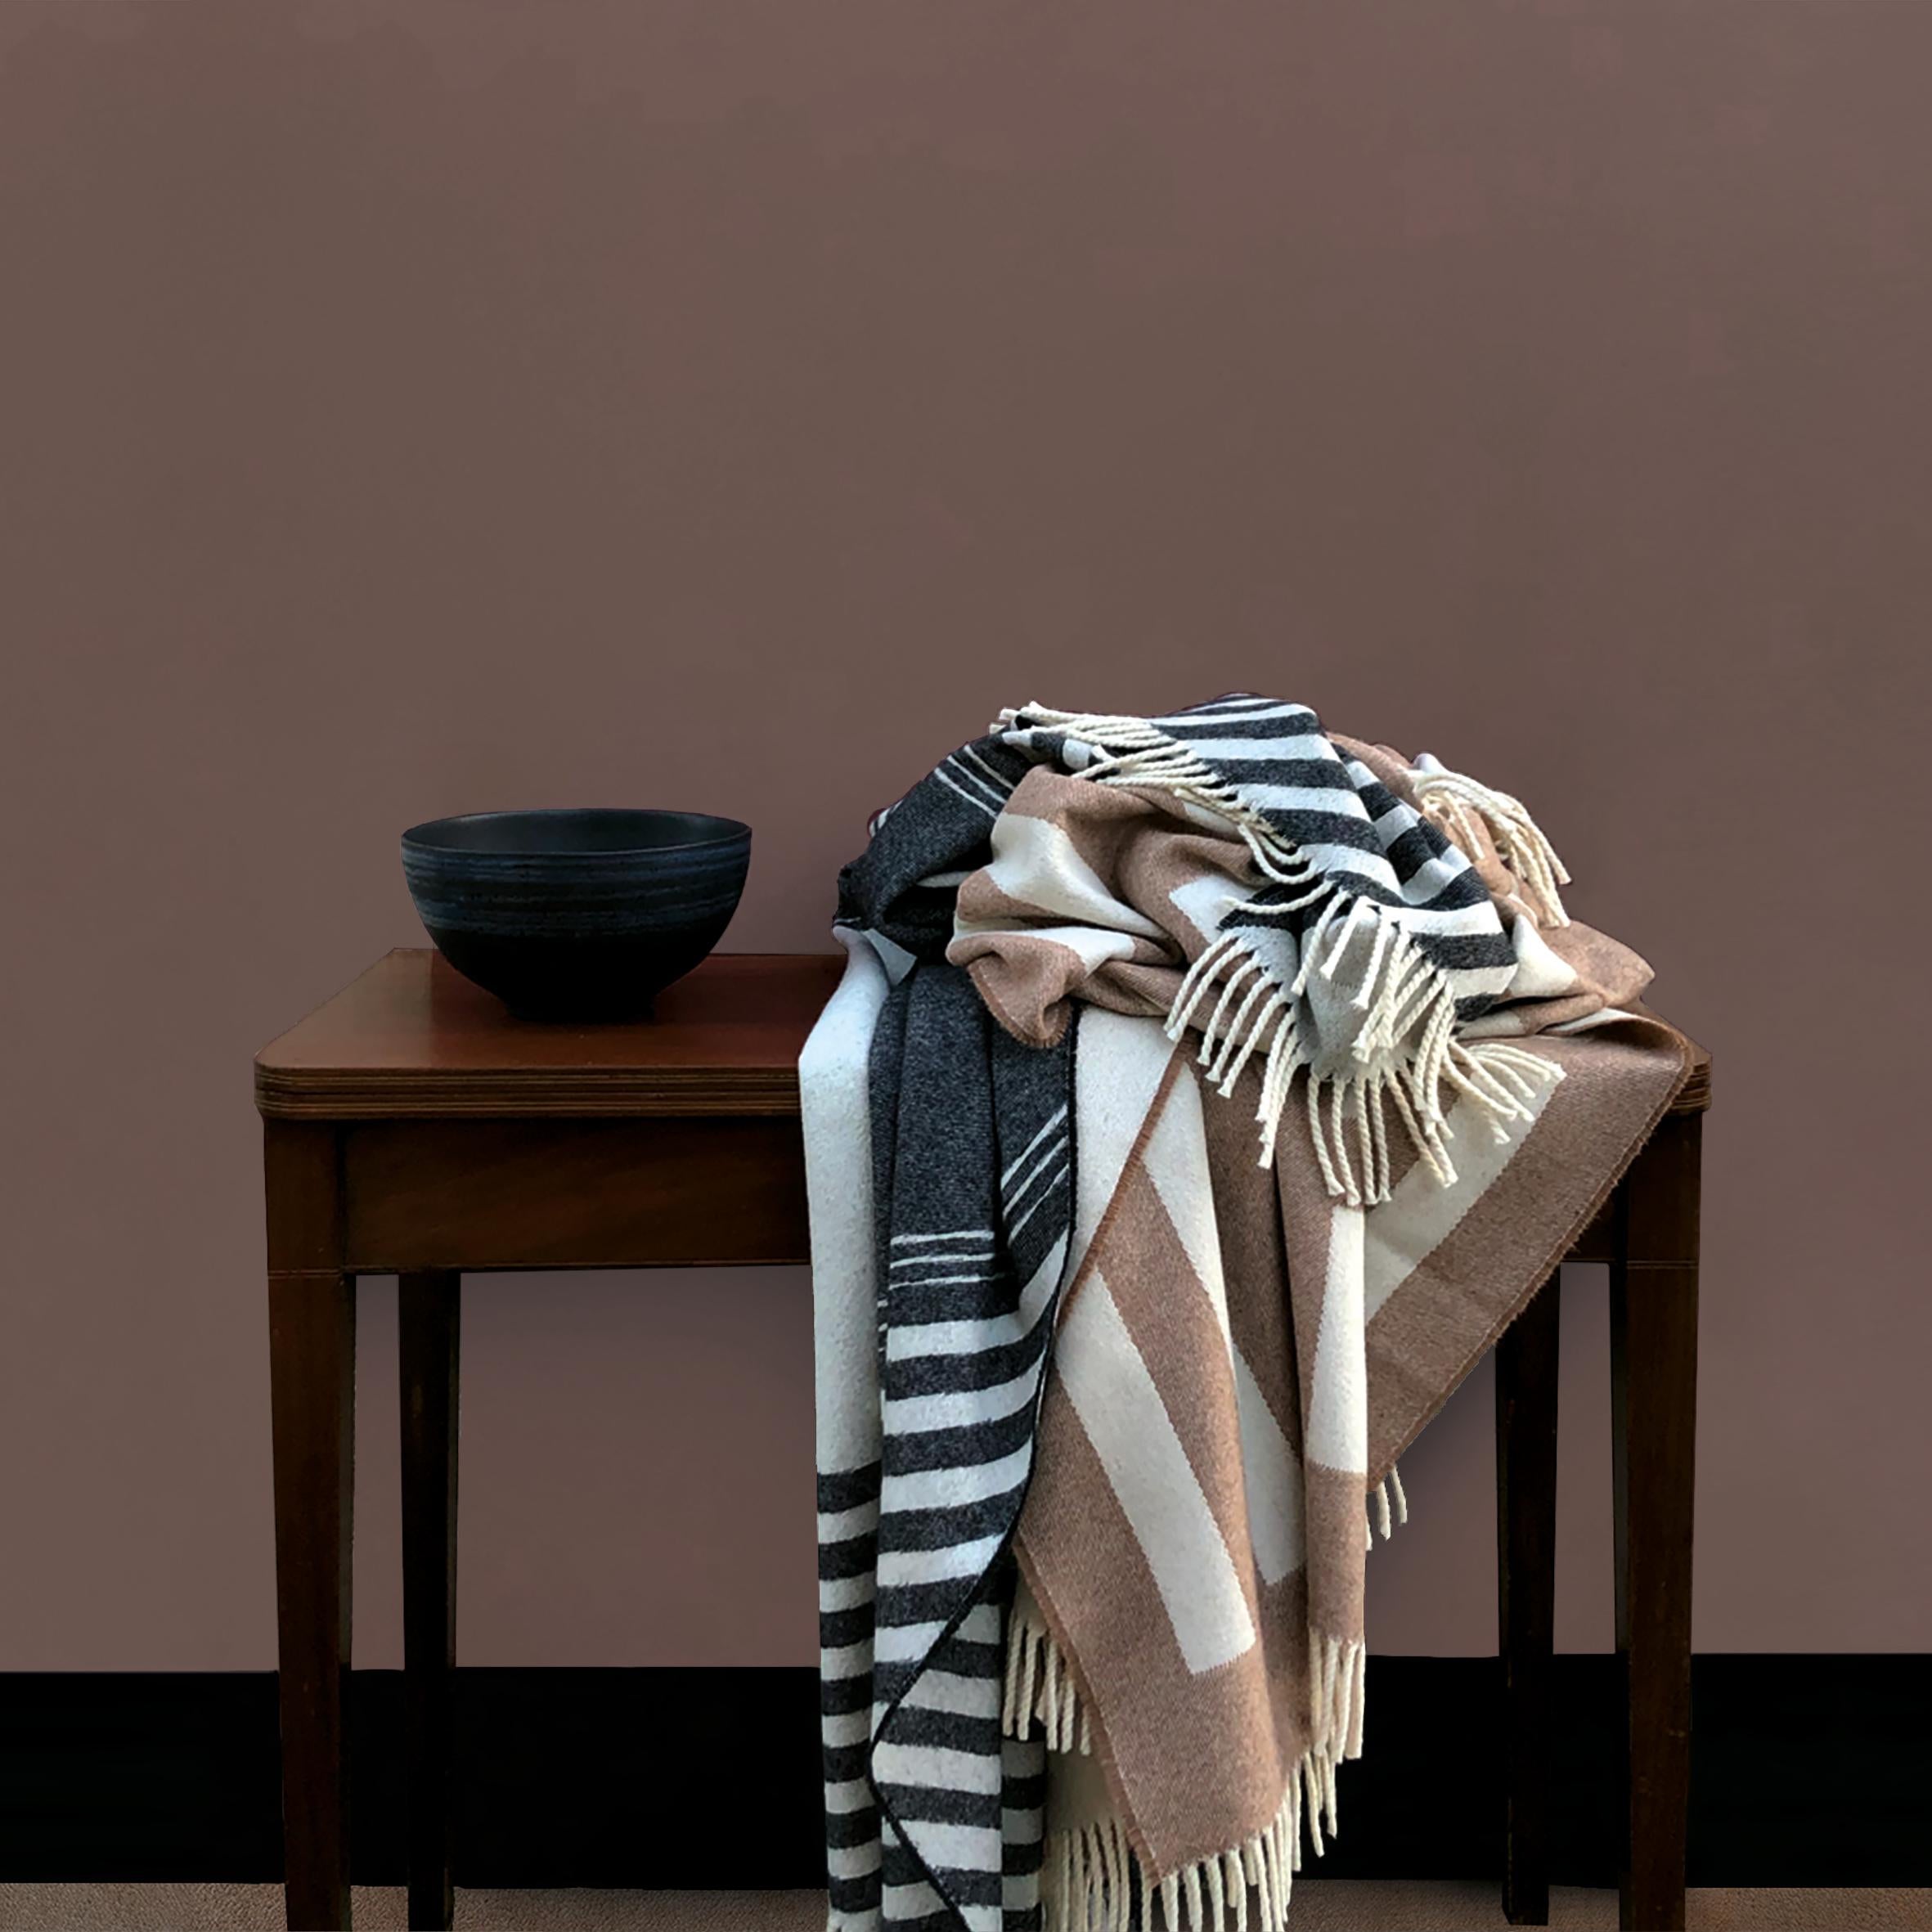 Our Harmon throw is inspired by architectural references. Its woven design adds a bold pop of pattern whether laid across a sofa or a bed.

Designed to have a meaningful impact on everyday home life, our throws are the ultimate balance between